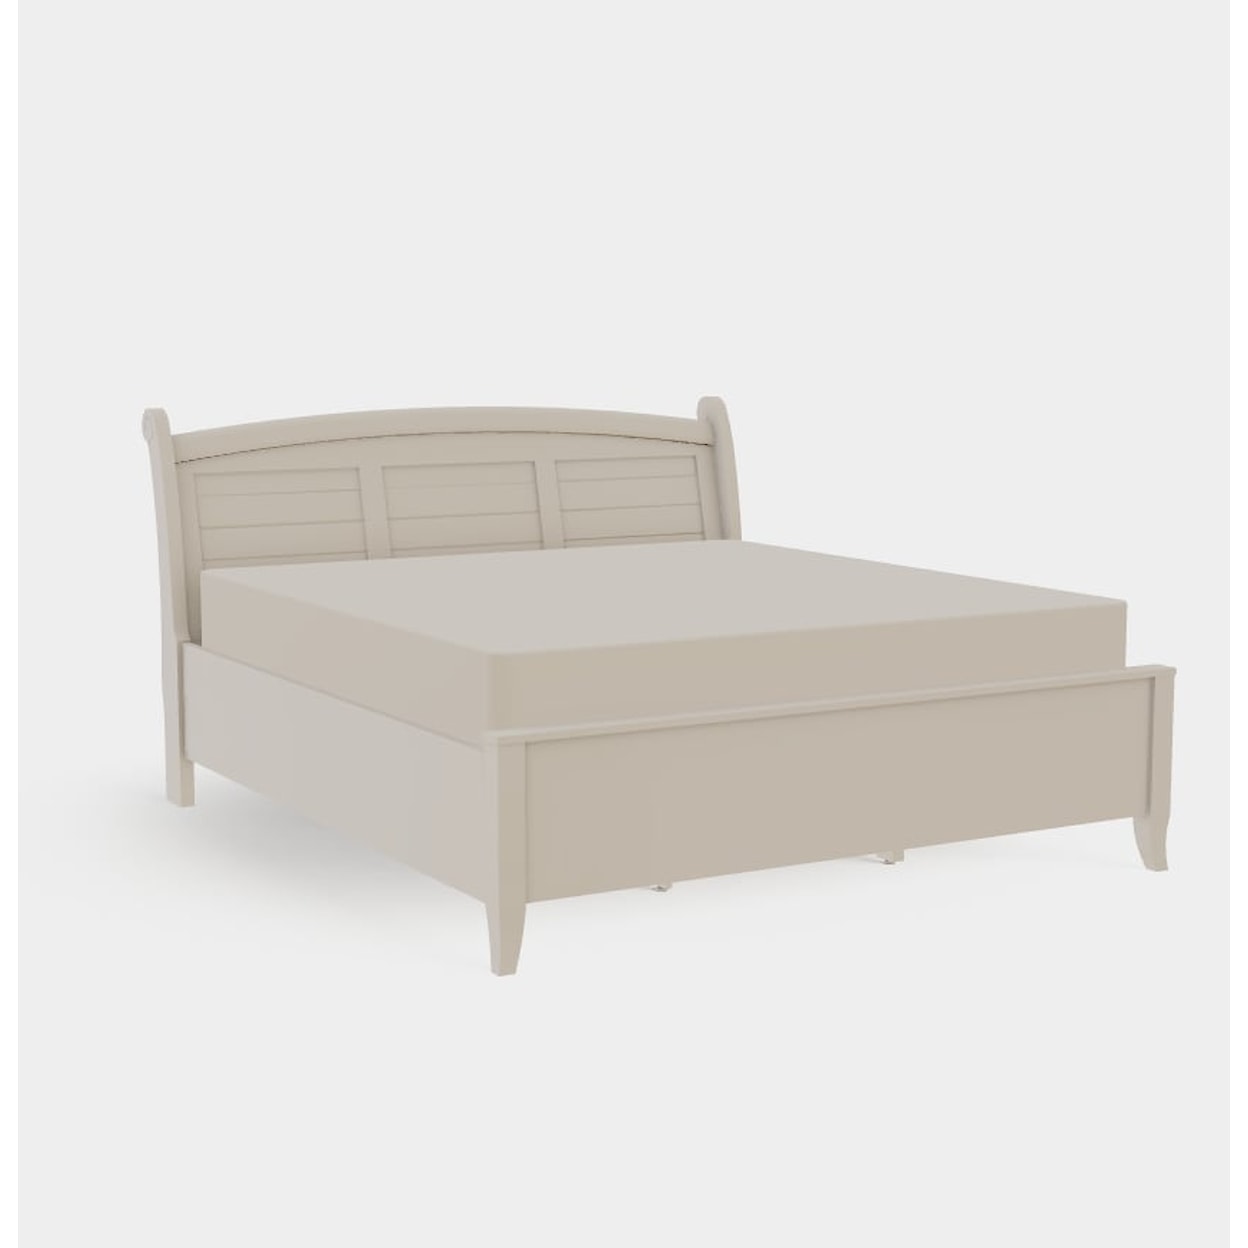 Mavin Tribeca King Arched Right Drawerside Bed